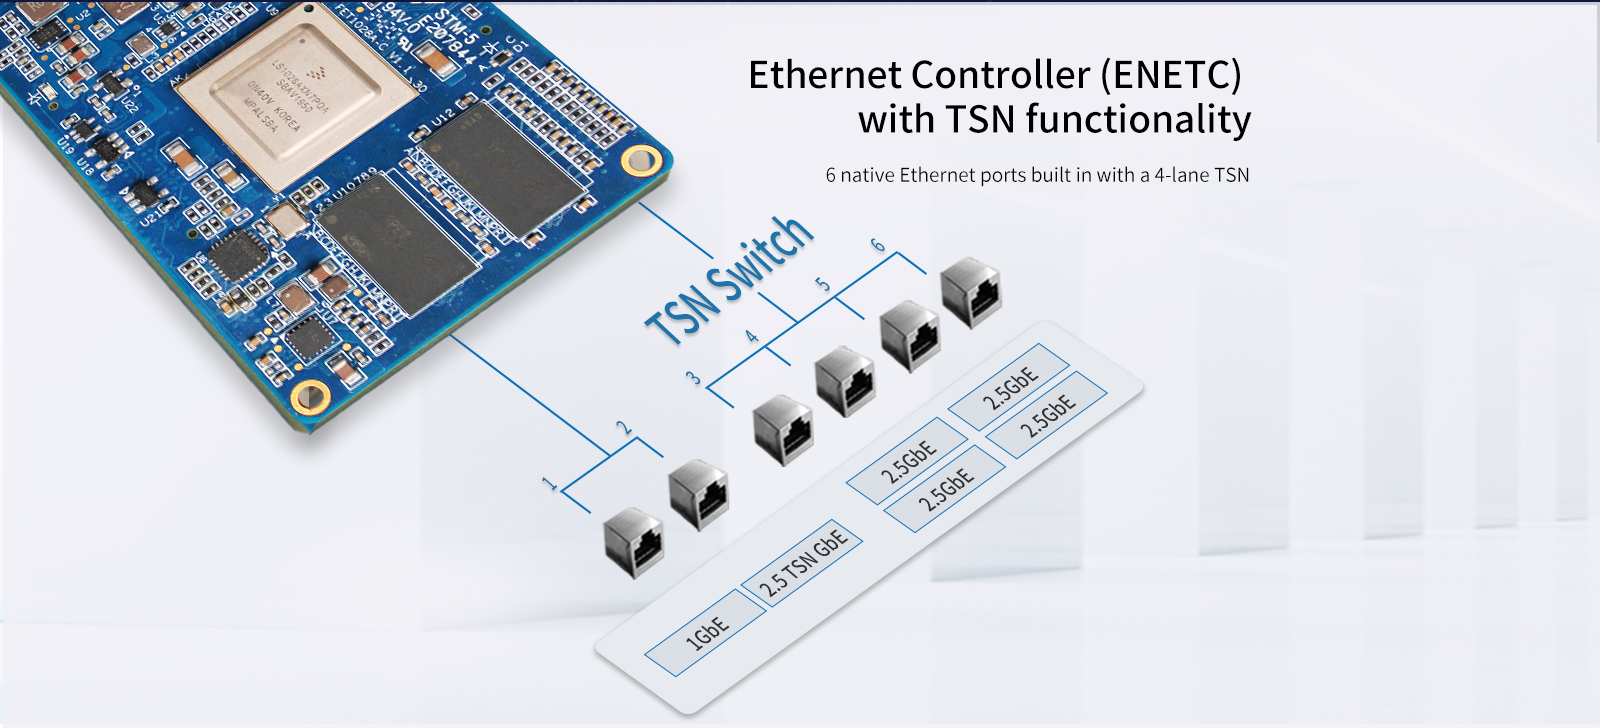 LS1028A single board computer/development board 6 Ethernet with TSN functionality